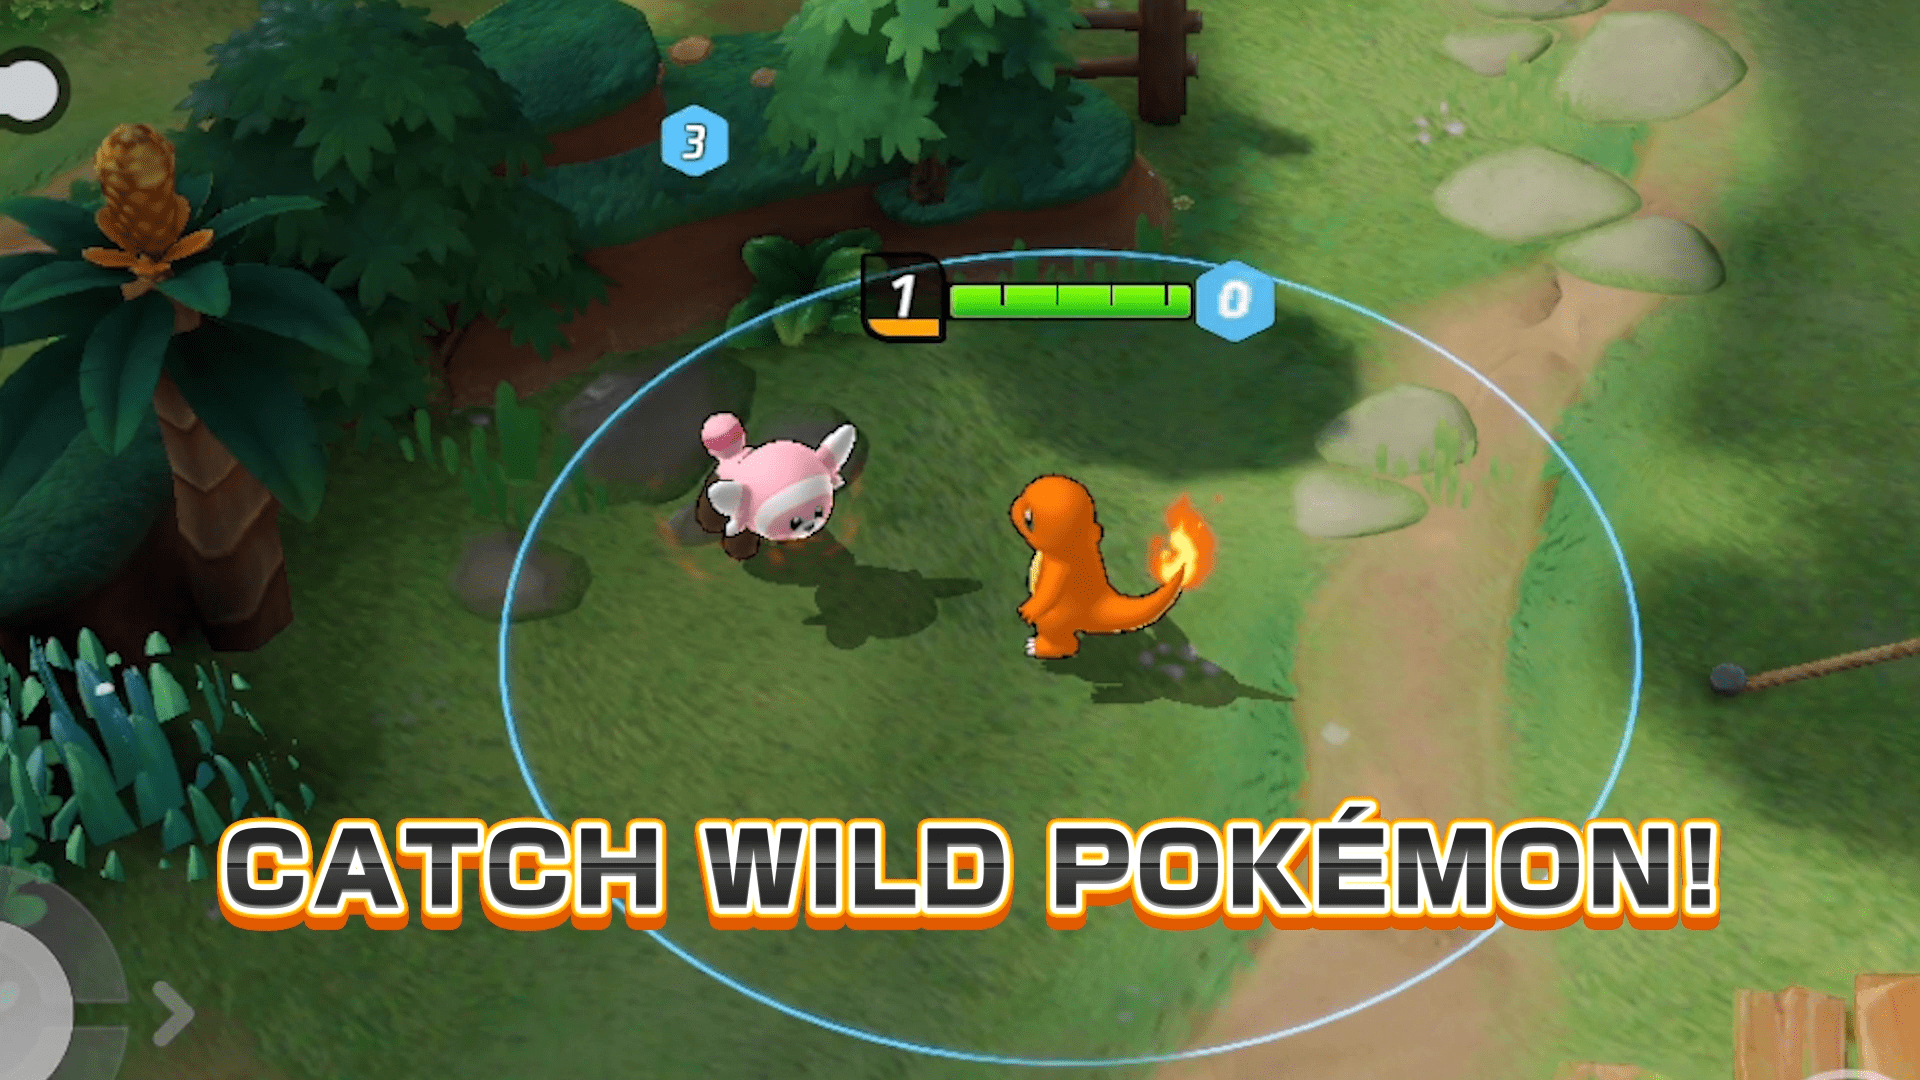 Everything we know about the Pokémon Unite mobile MOBA